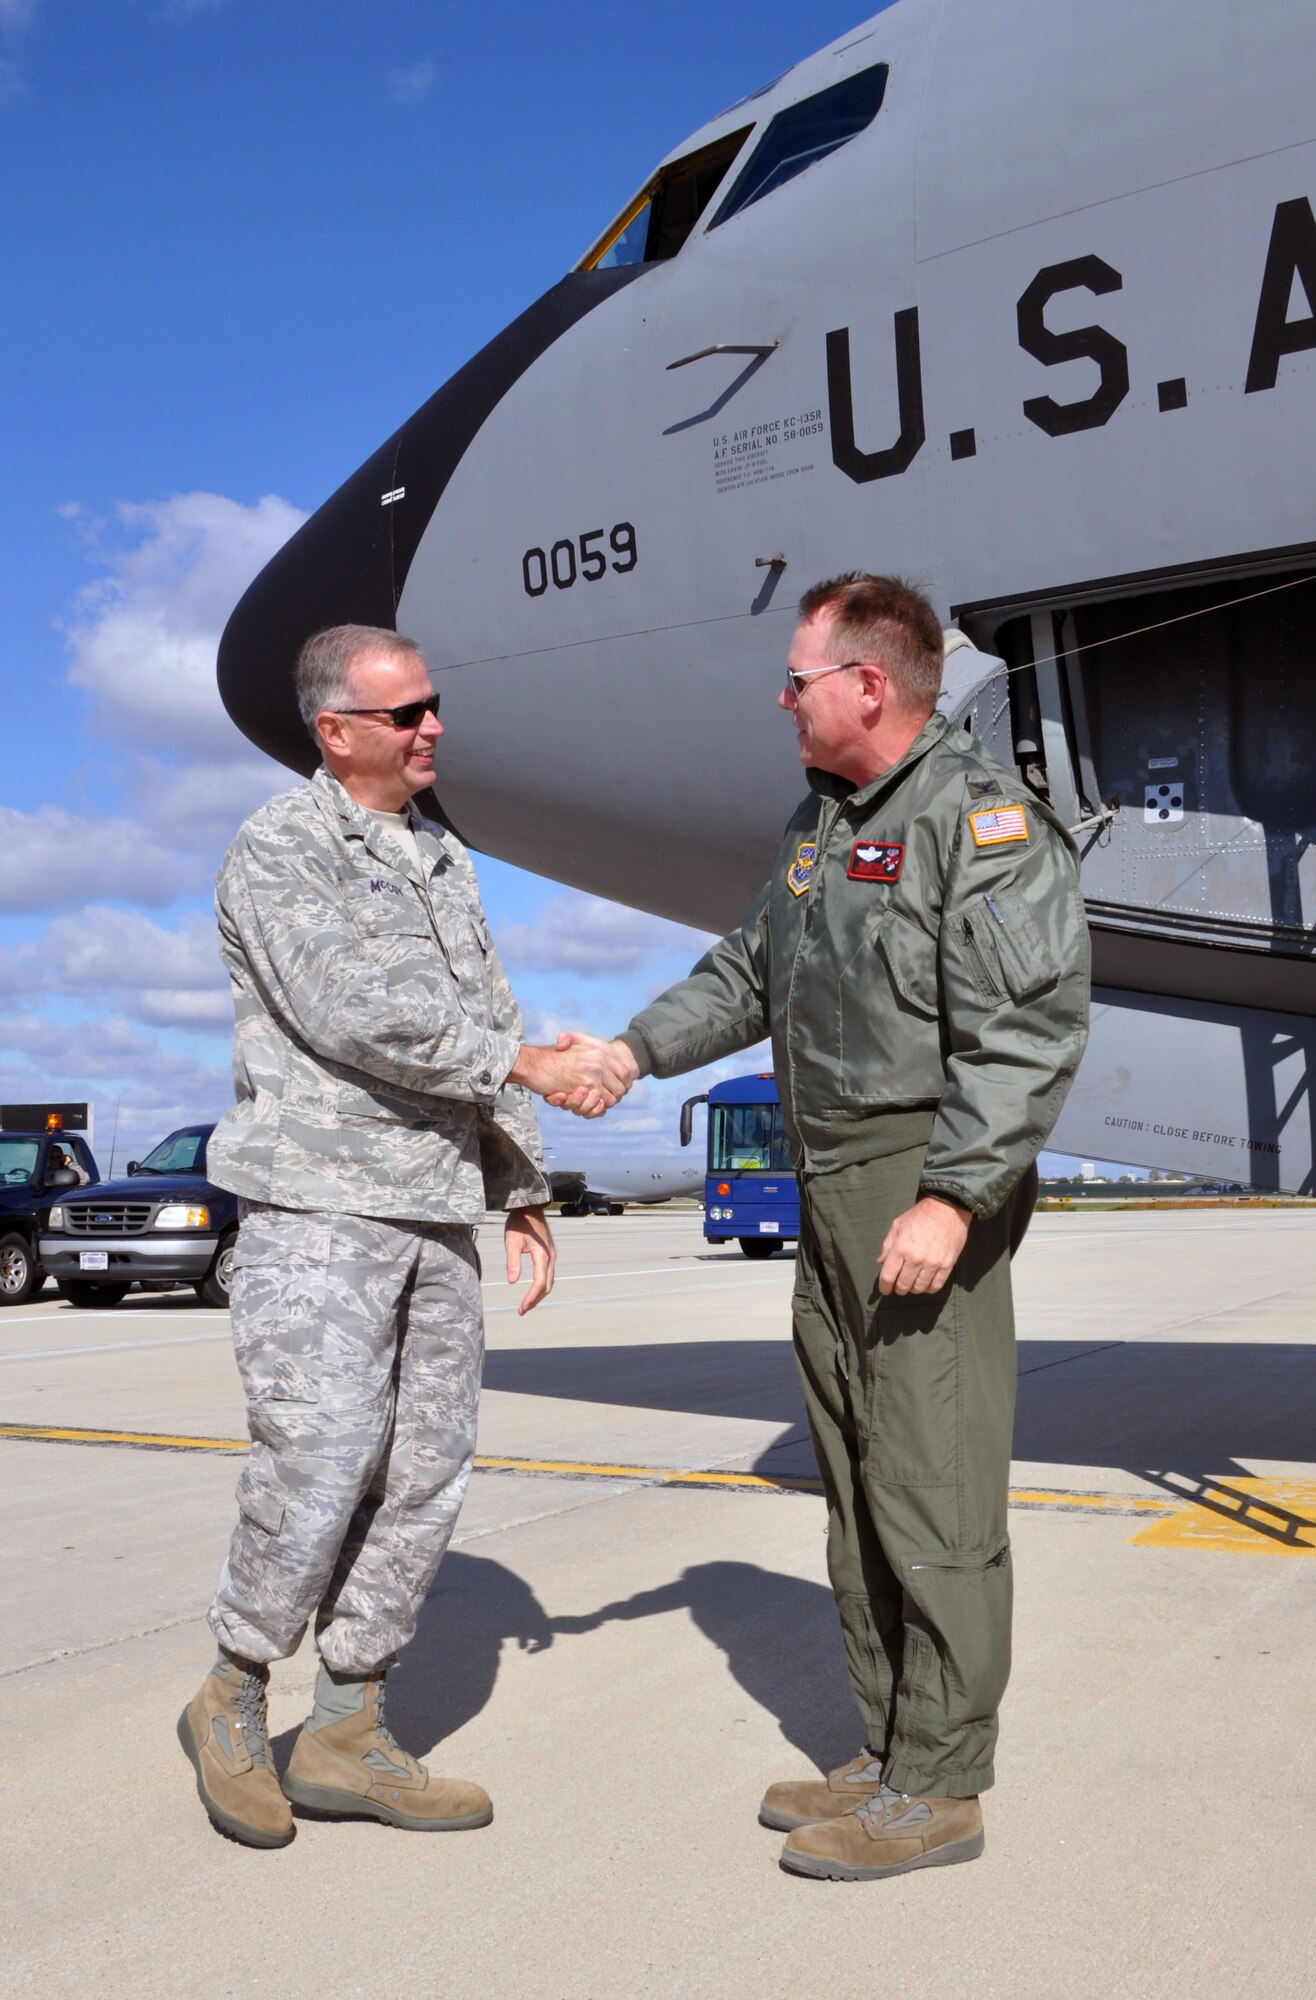 Brig. Gen. John E. McCoy, Assistant Adjutant General for Air, Wisconsin Air National Guard(left) welcomes home Col. Ted Metzgar, Commander, 128th Air Refueling Wing after returning from a 4-month long deployment in Western Europe on Friday, October 14, 2011 at Gen. Mitchell Air National Guard Base, Milwaukee. While deployed Metzgar served as the commander of the 313th Air Expeditionary Wing, supporting Operation Unified Protector. (U.S. Air Force photo/Capt. John P. Capra)